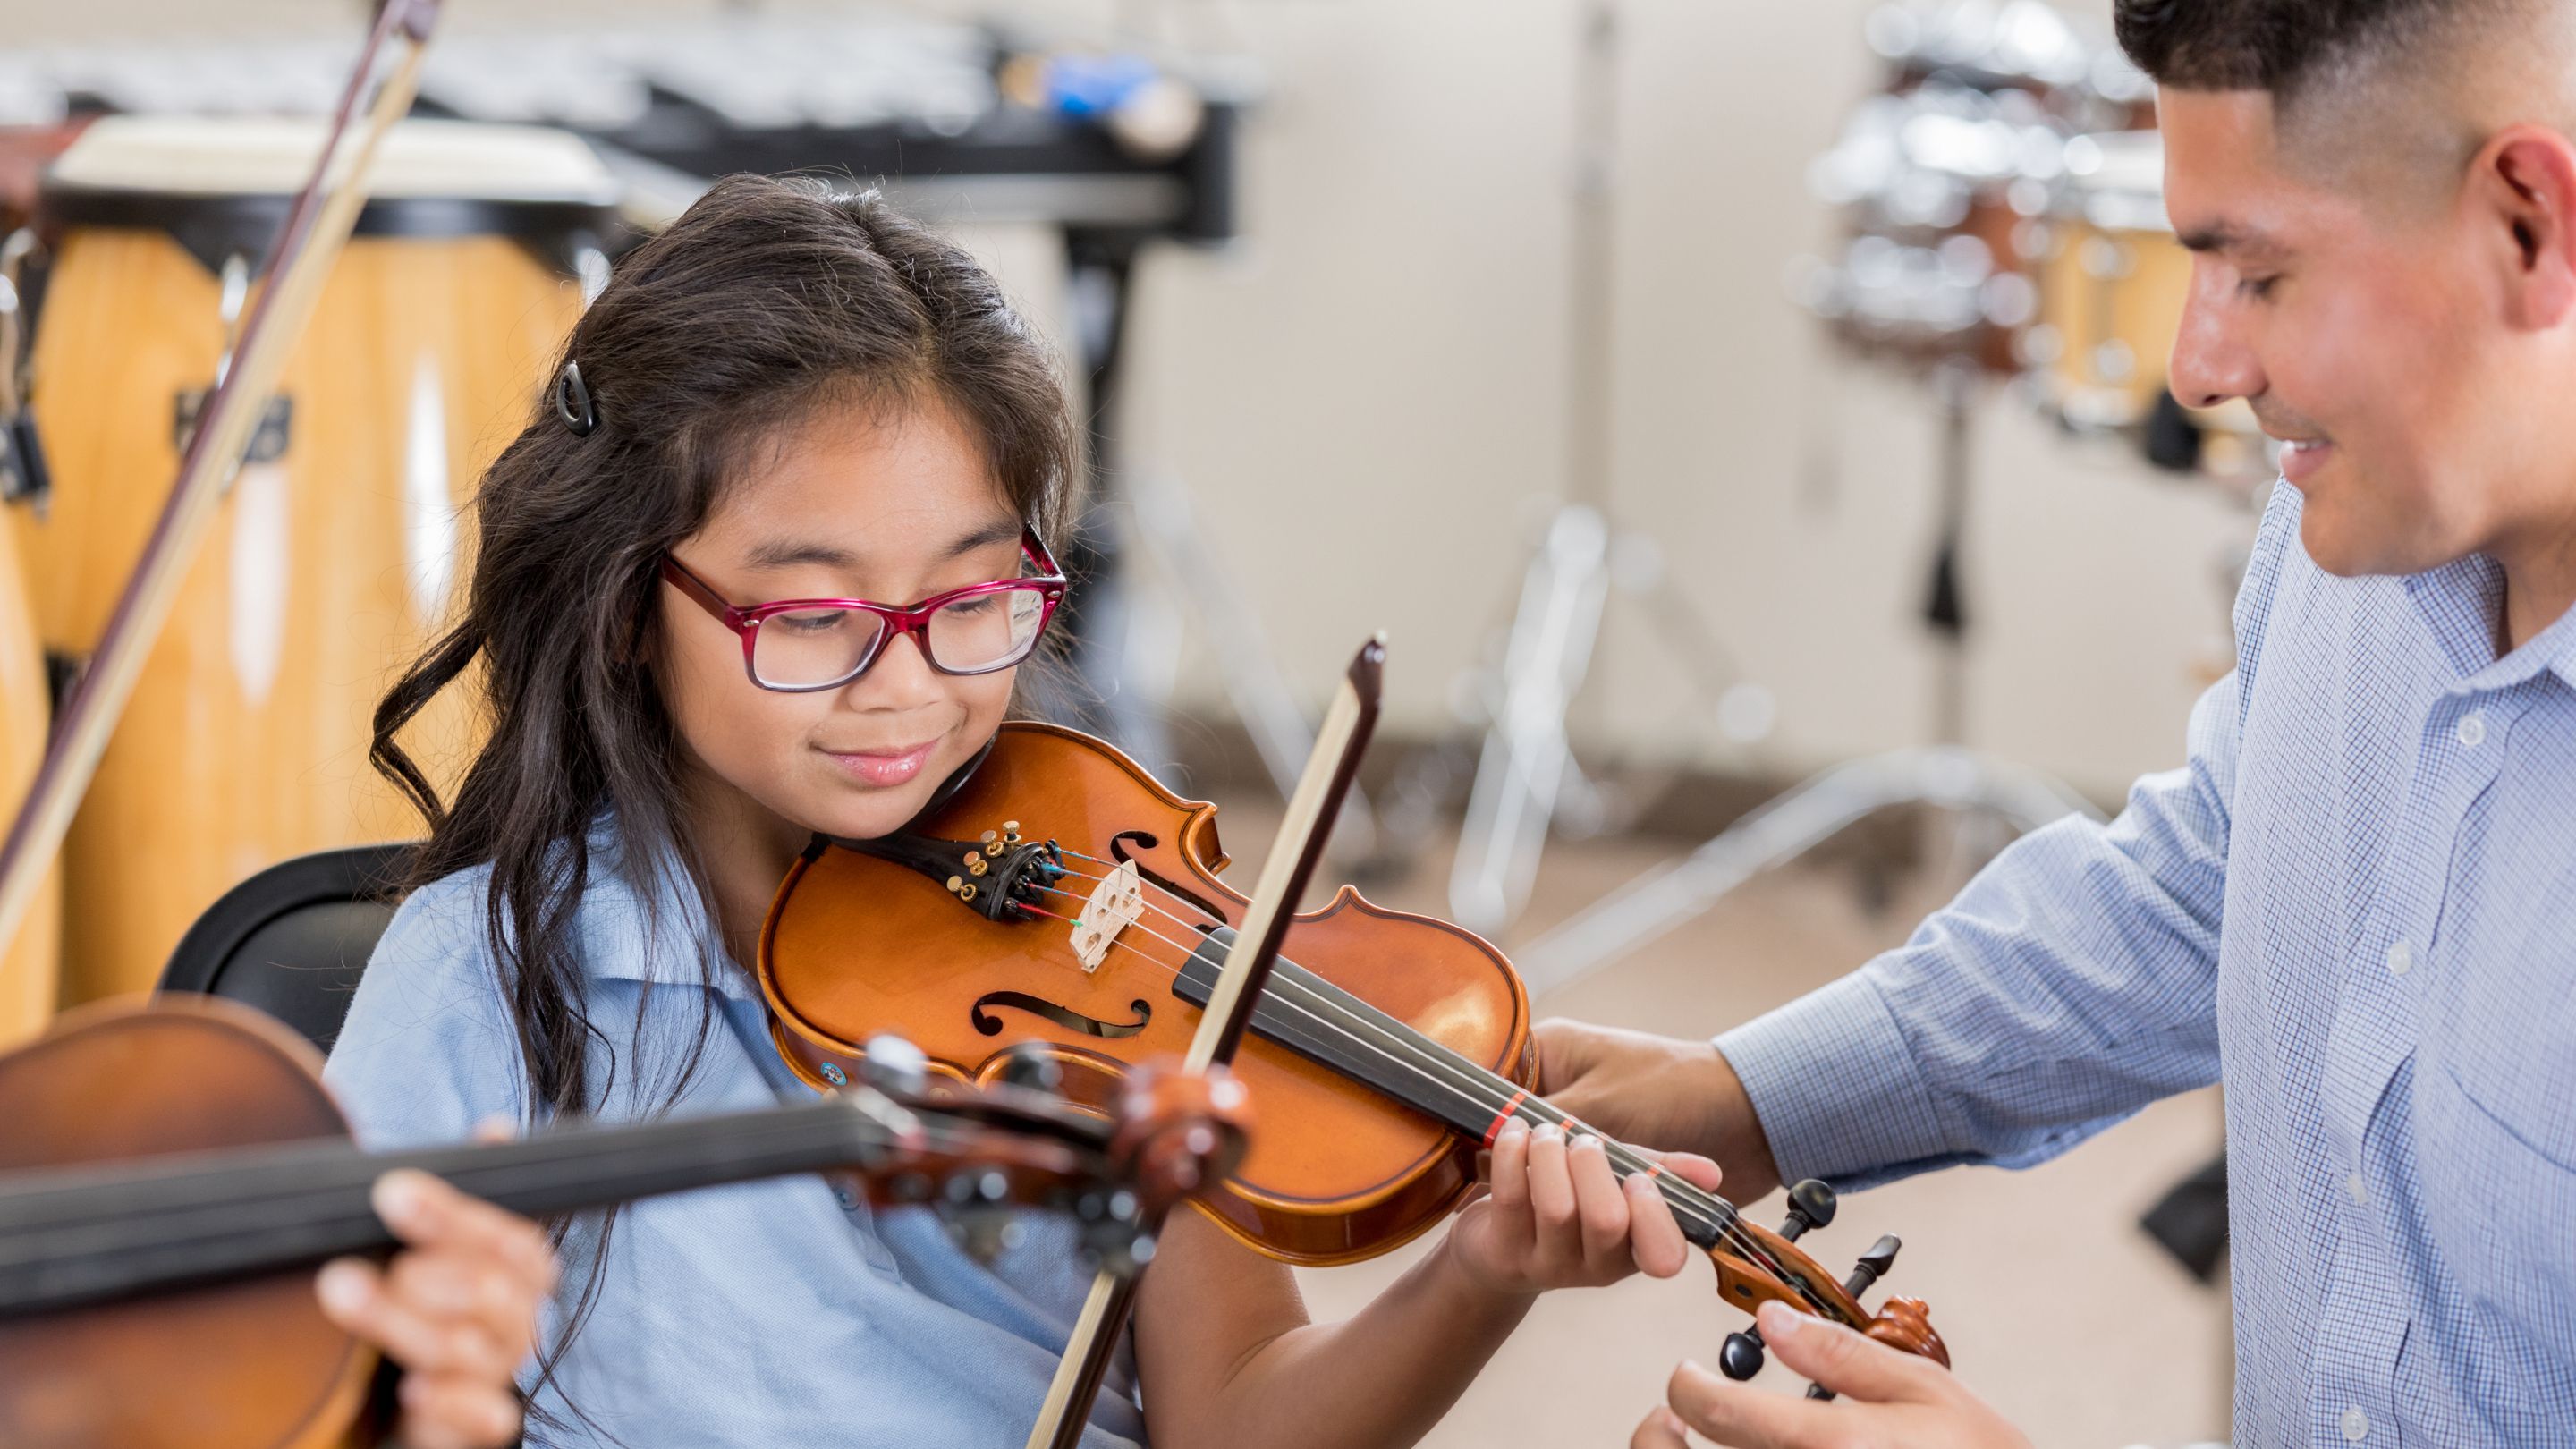 Music Training Can Be a Literacy Superpower